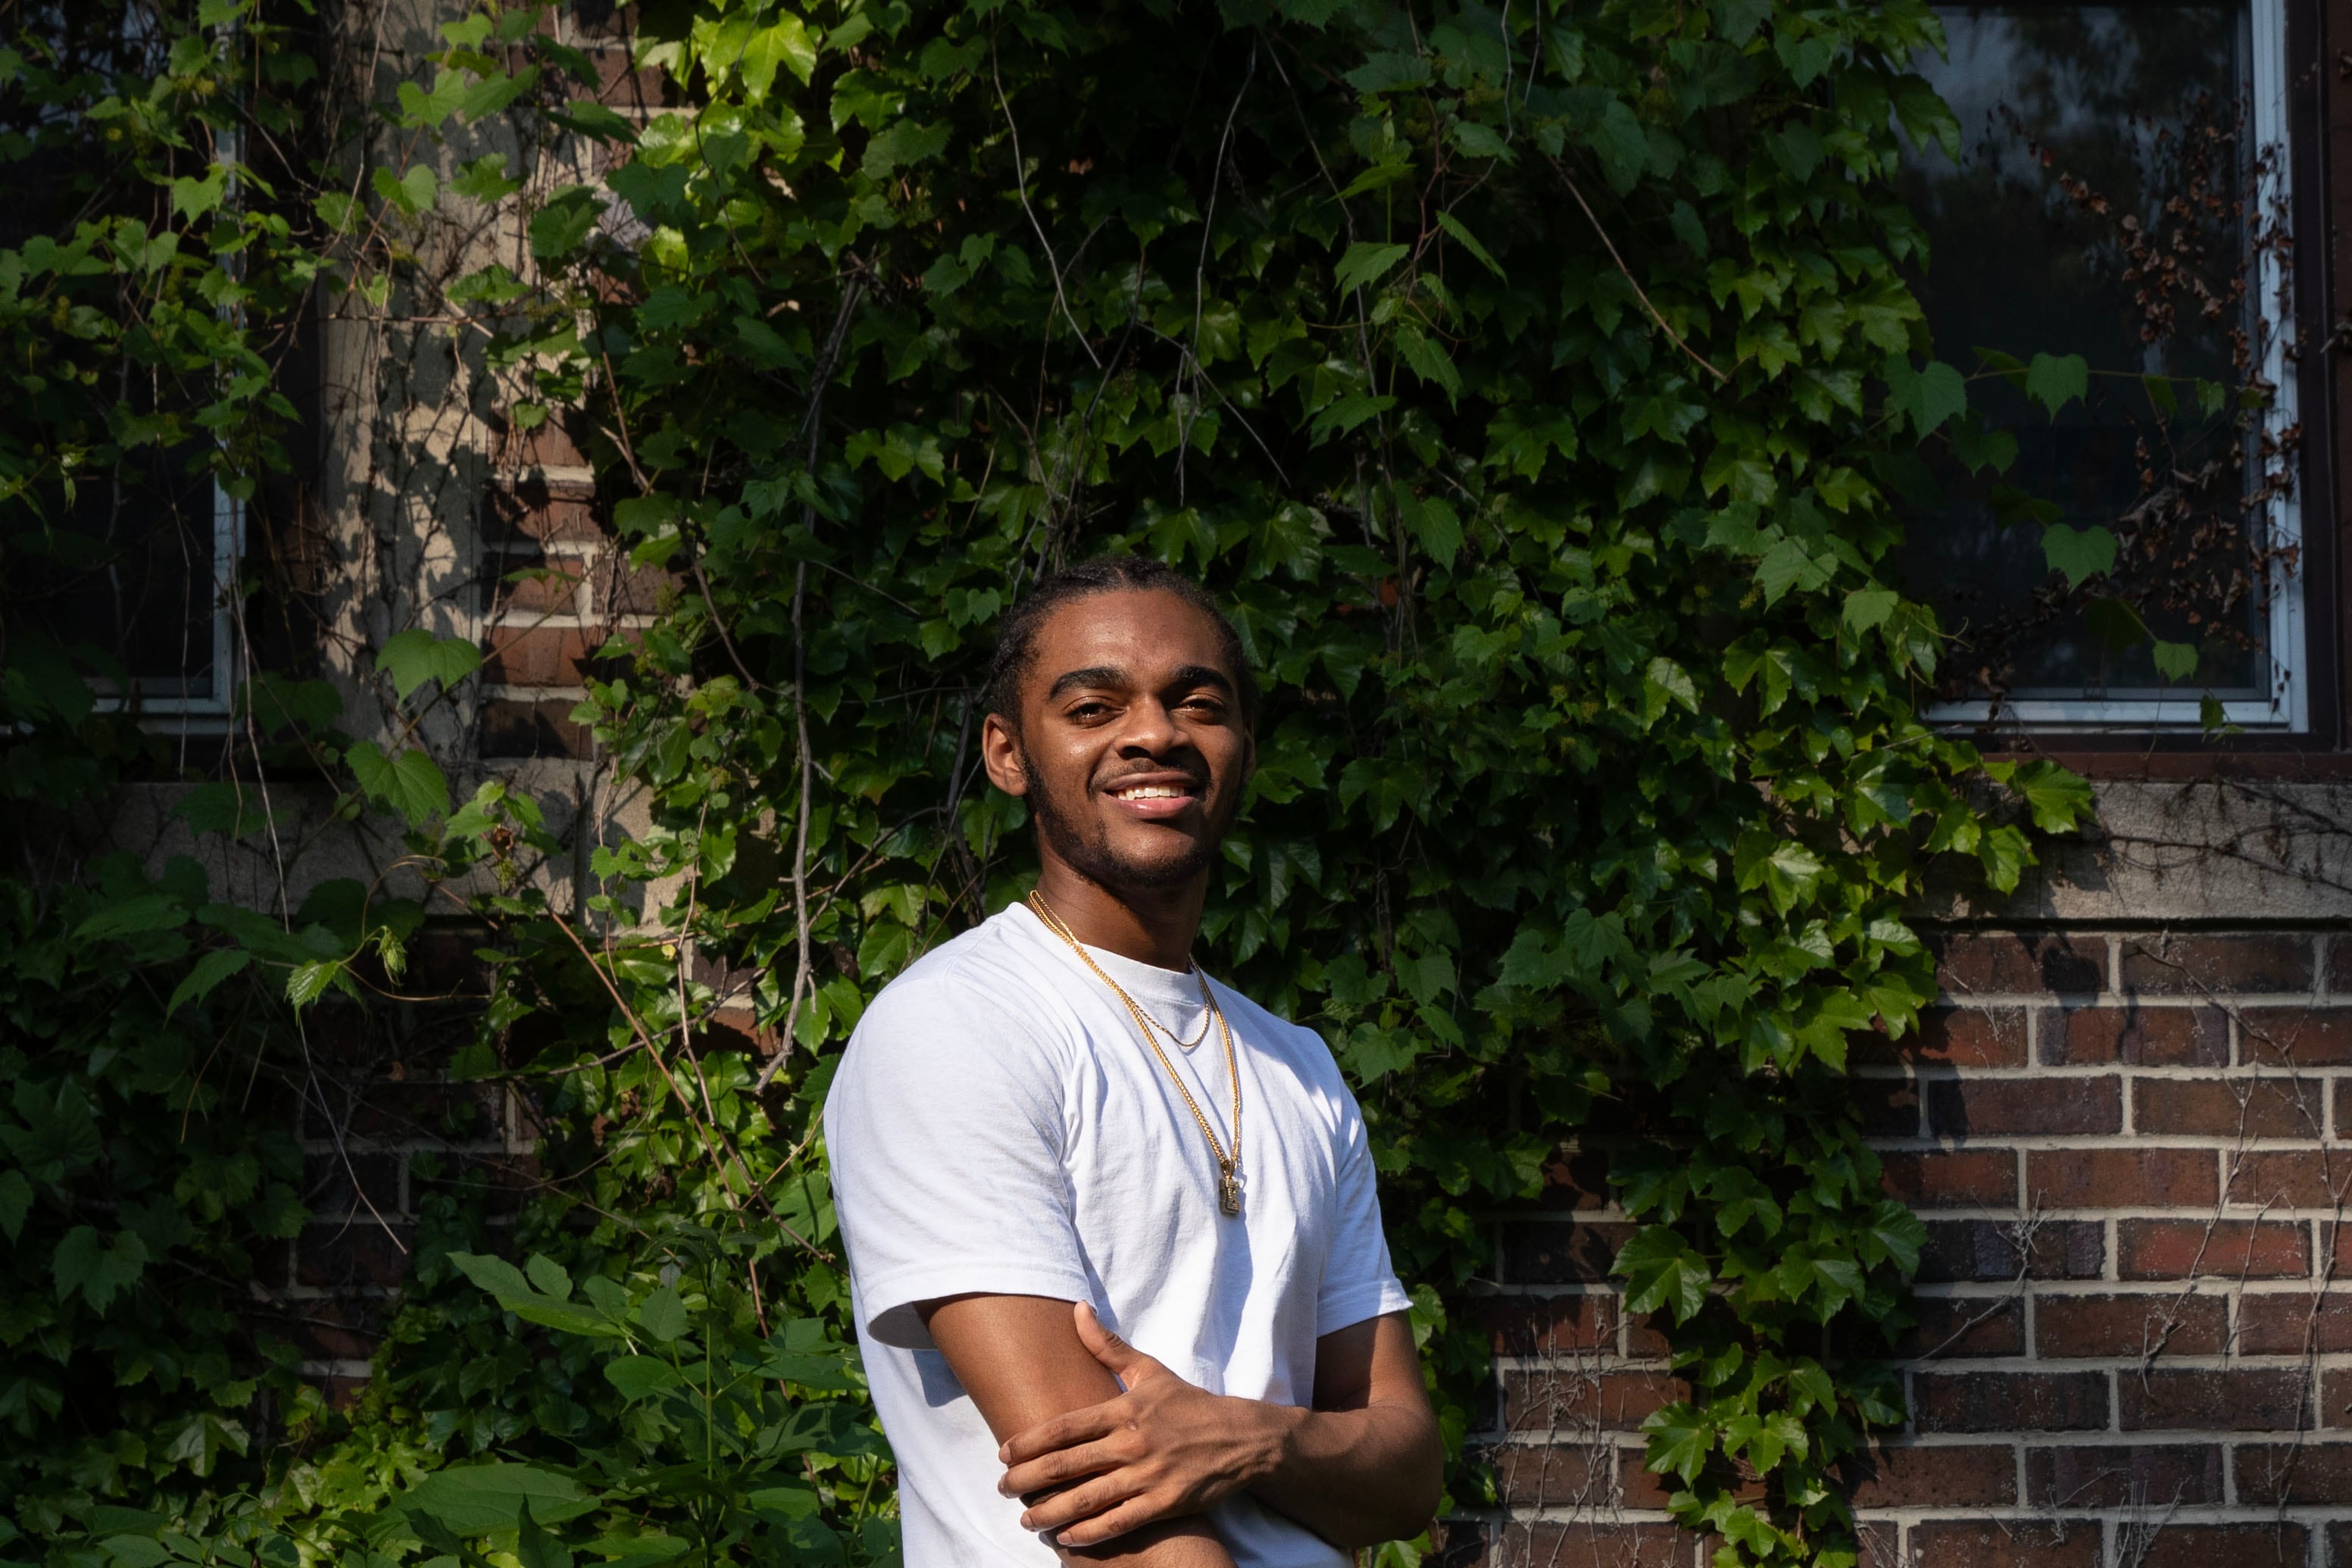 A high school senior with short dark hair and wearing a white t-shirt and a gold necklace with a diamond letter "K" crosses his arms and poses for a portrait while standing in front of a brick wall with greenery crawling up the wall.